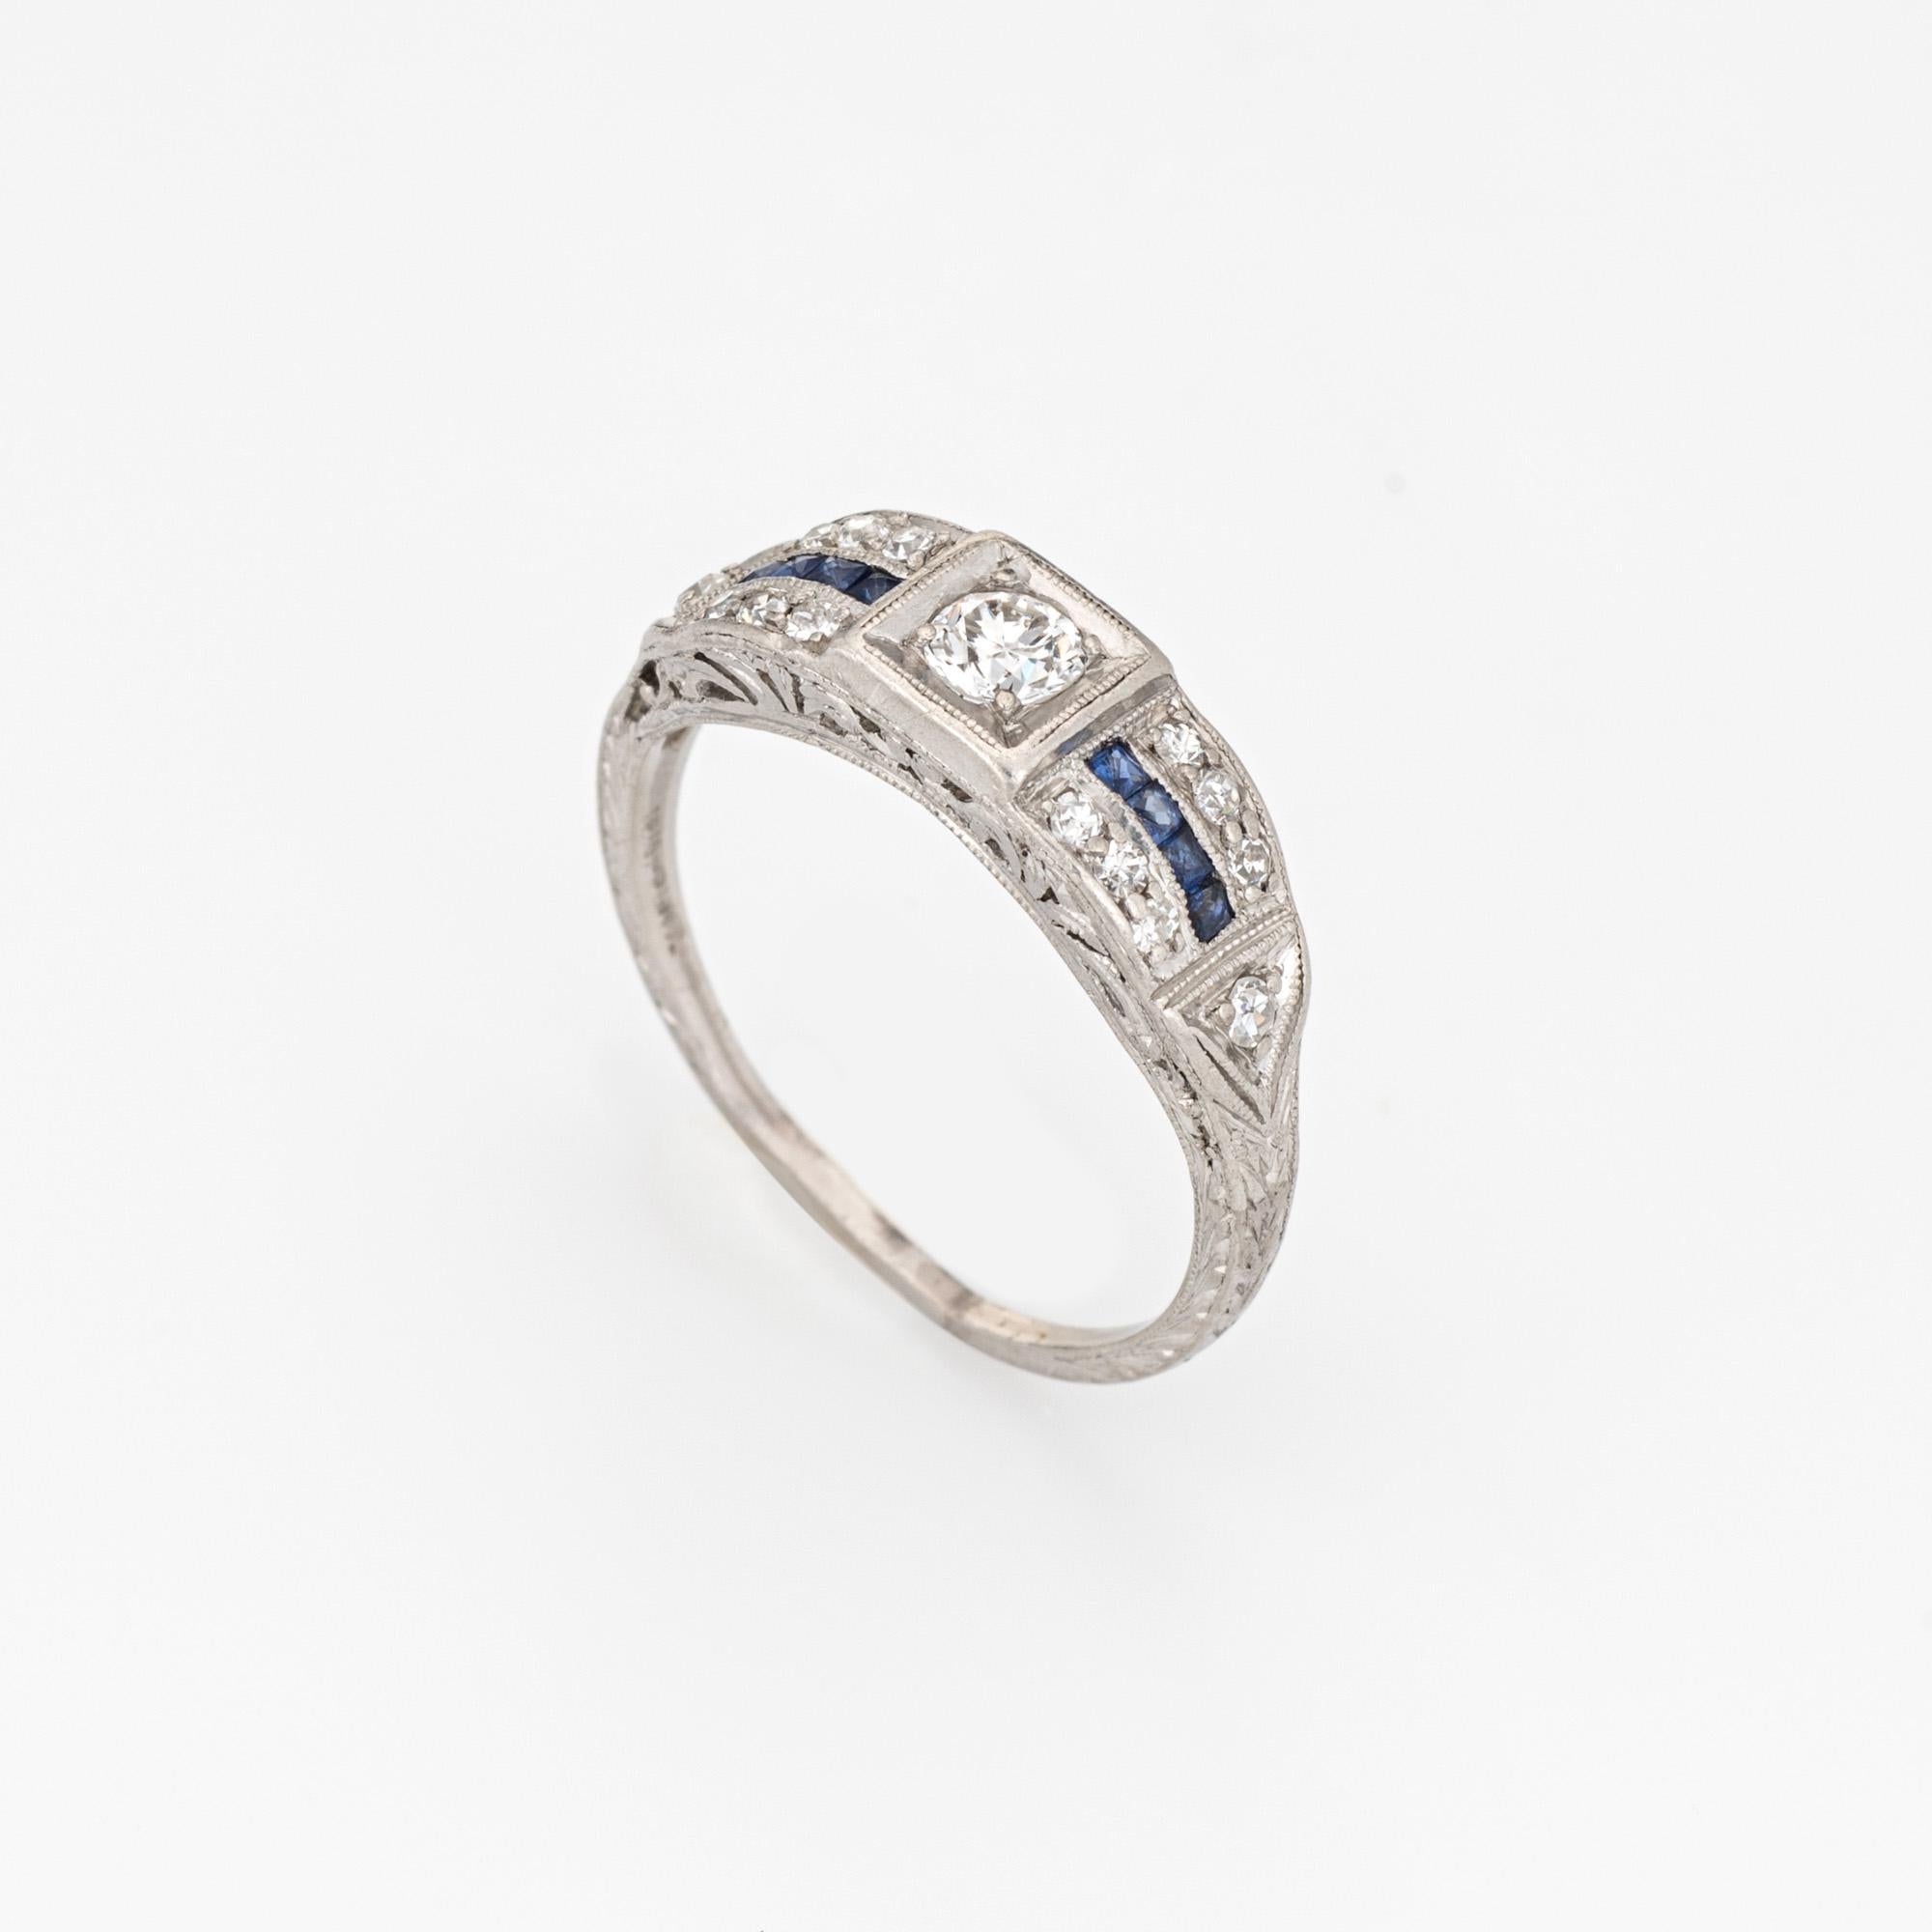 Finely detailed vintage Art Deco diamond & sapphire ring (circa 1920s to 1930s) crafted in platinum. 

Center set estimated 0.20 carat old European cut diamond is accented with 14 estimated 0.02 carat single cut diamonds. The total diamond weight is